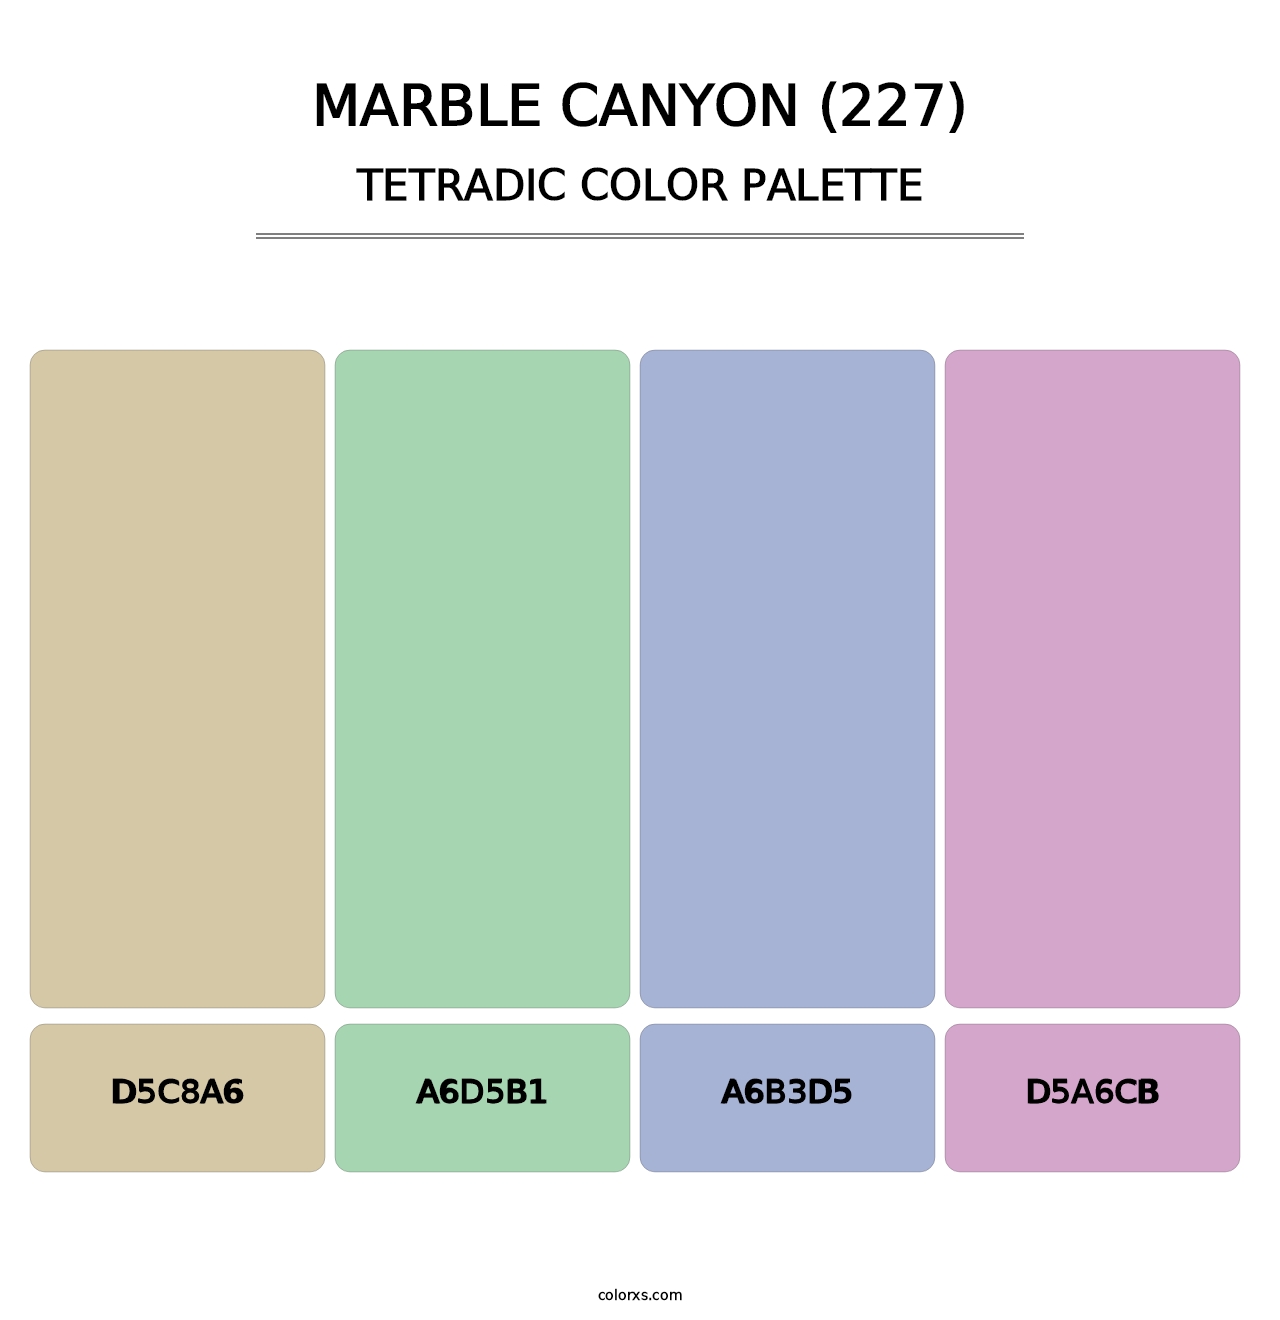 Marble Canyon (227) - Tetradic Color Palette